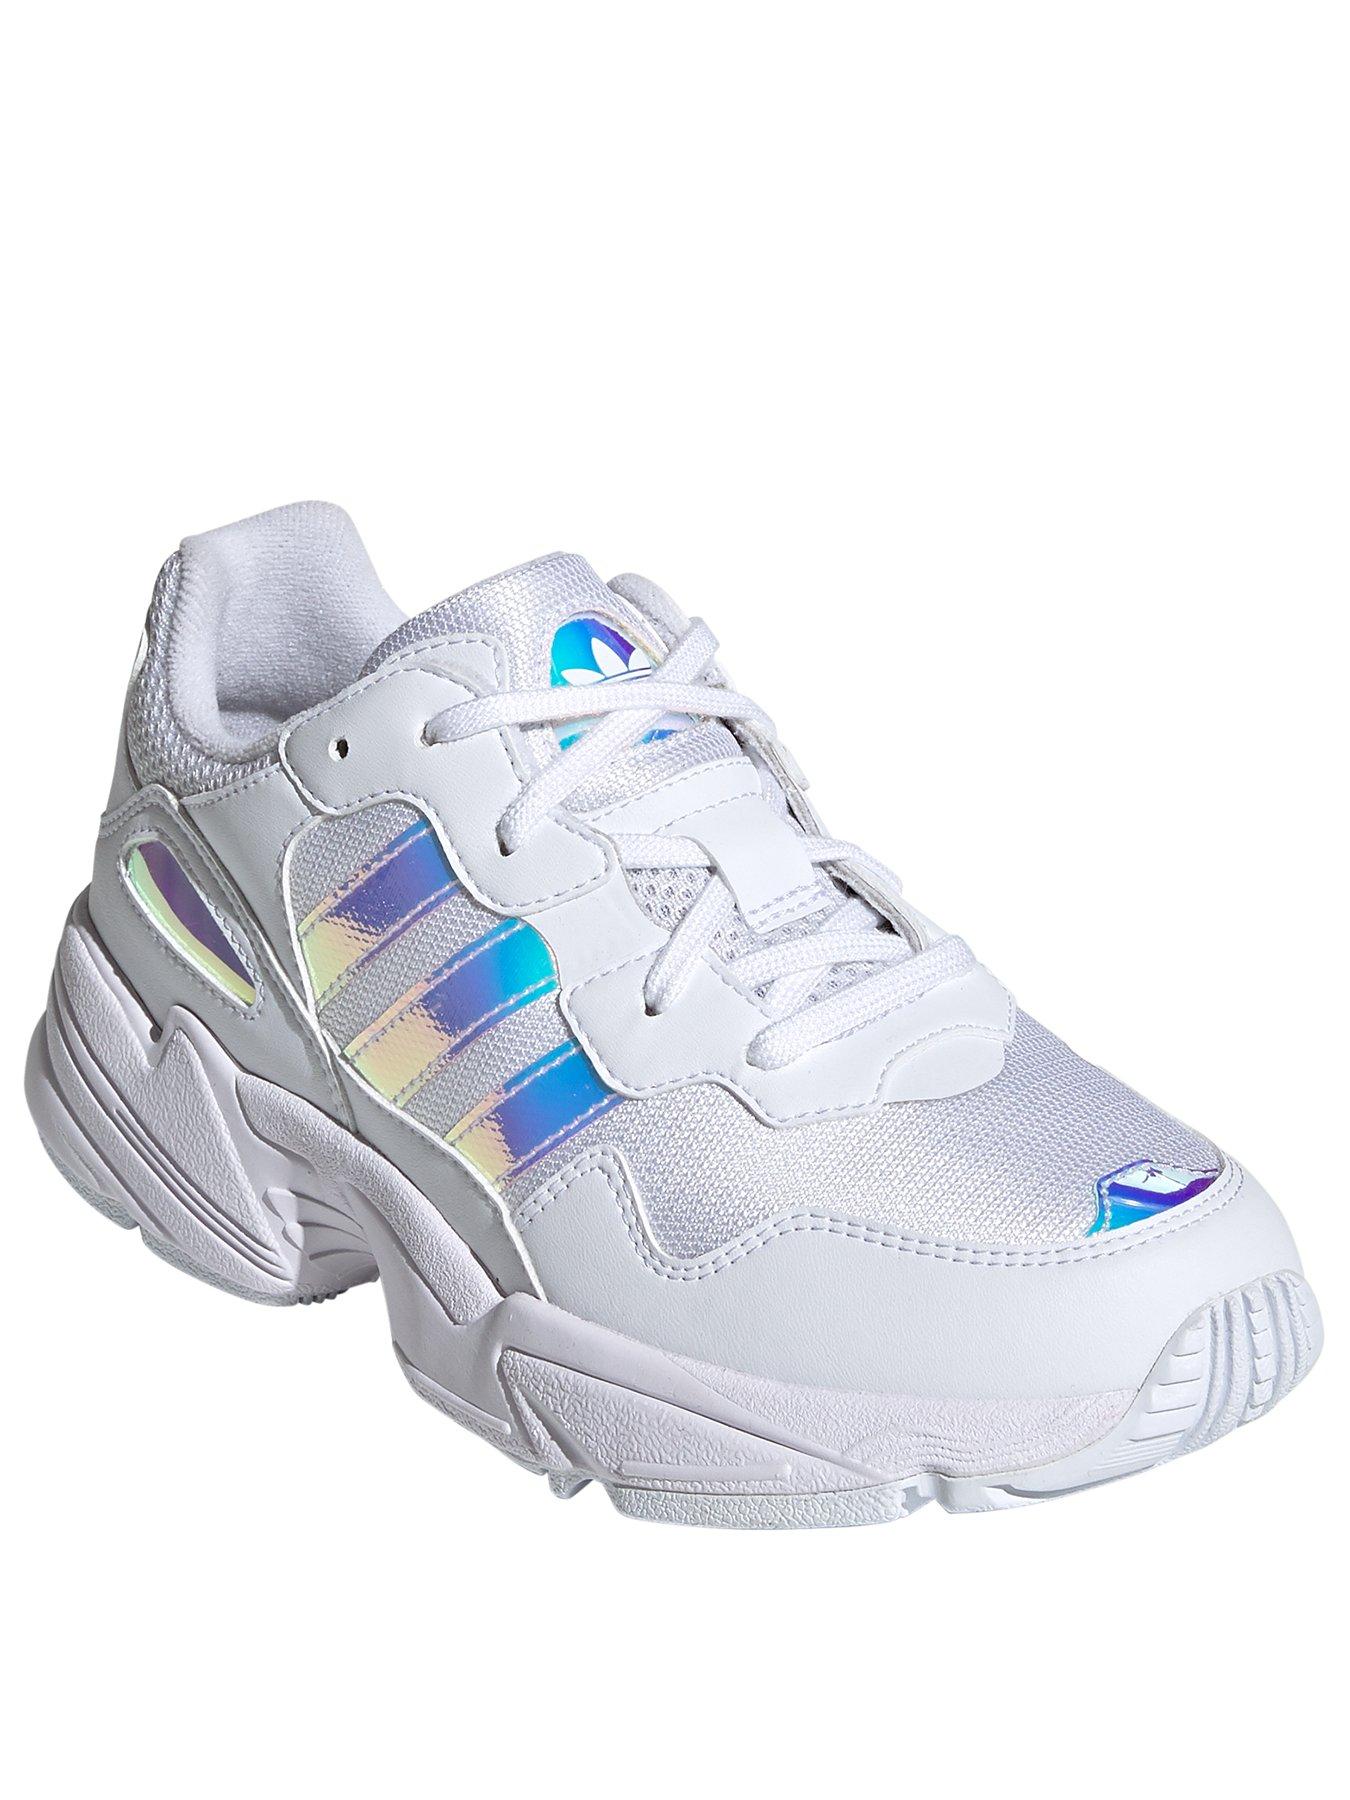 holographic adidas trainers